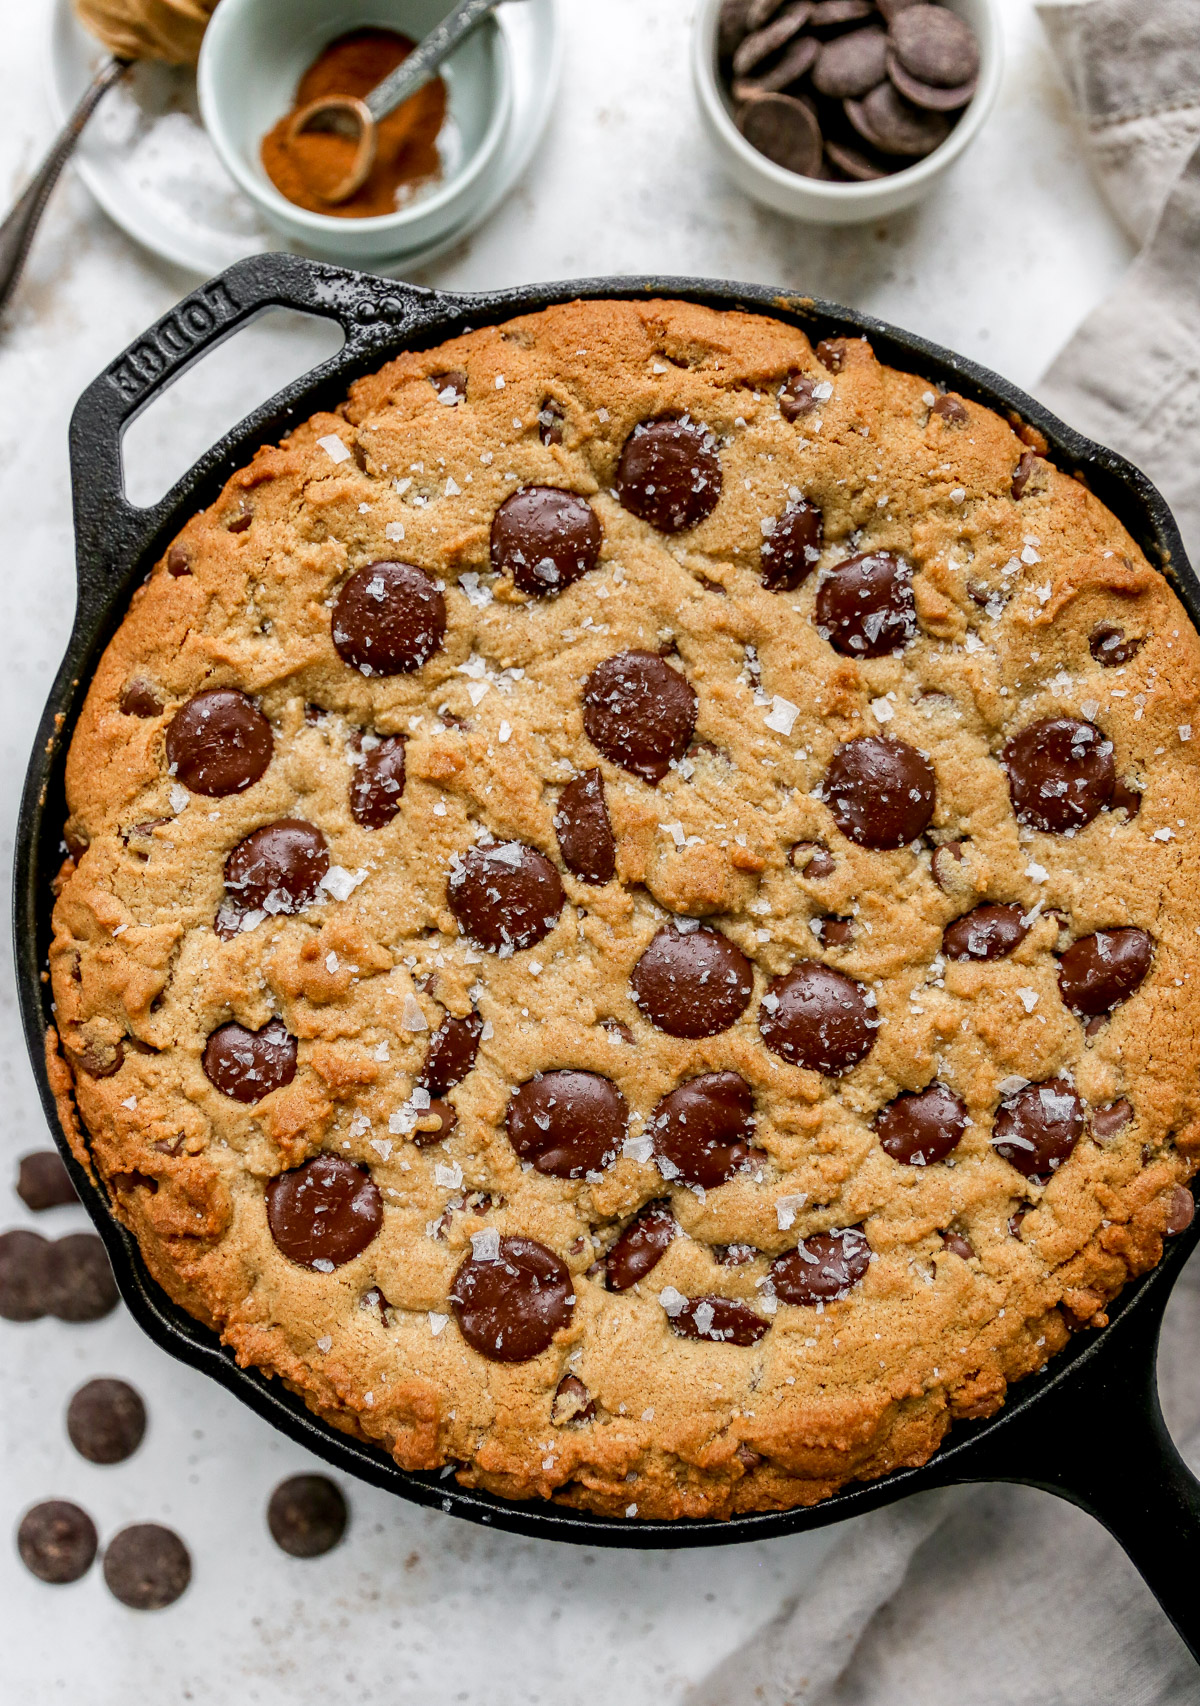 https://yestoyolks.com/wp-content/uploads/2021/09/Spiced-Peanut-Butter-Chocolate-Chip-Skillet-Cookie-5.jpg